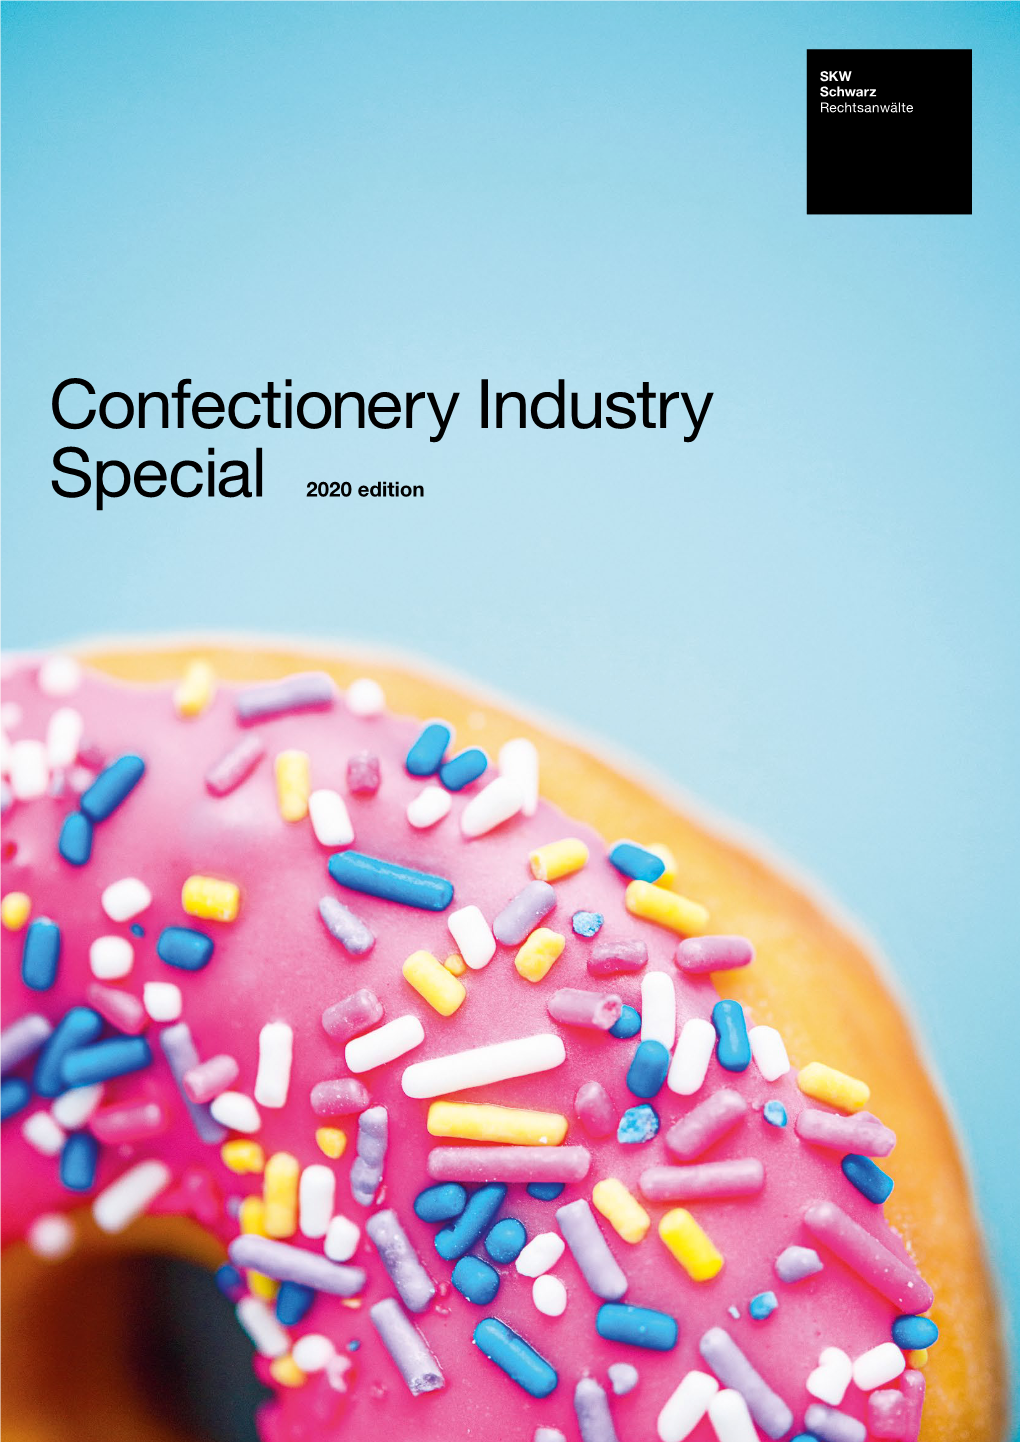 Confectionery Industry Special – 2020 Edition